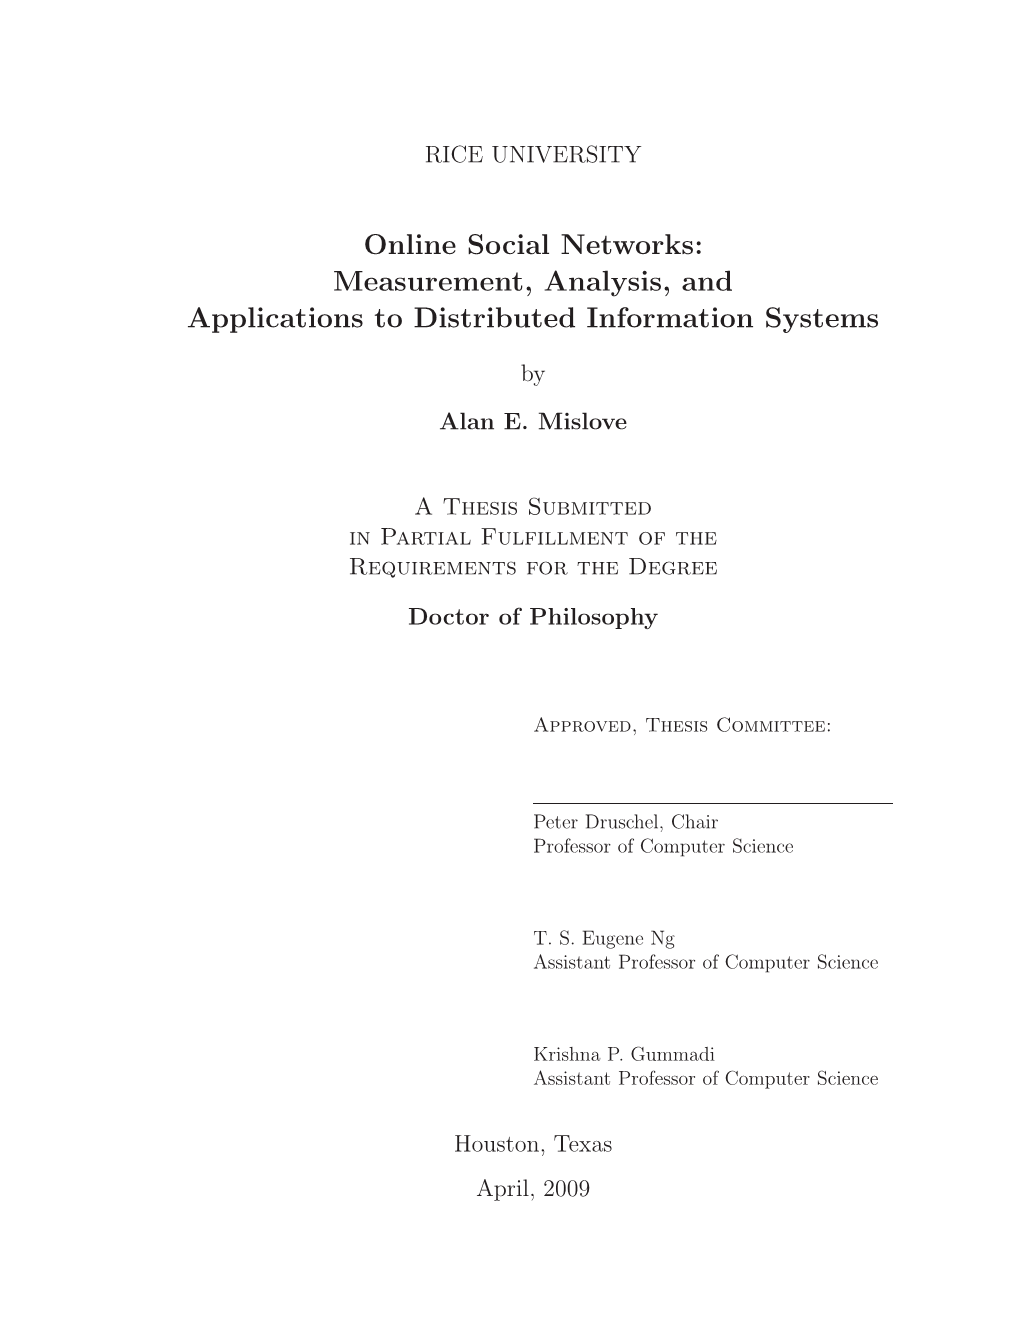 Online Social Networks: Measurement, Analysis, and Applications to Distributed Information Systems